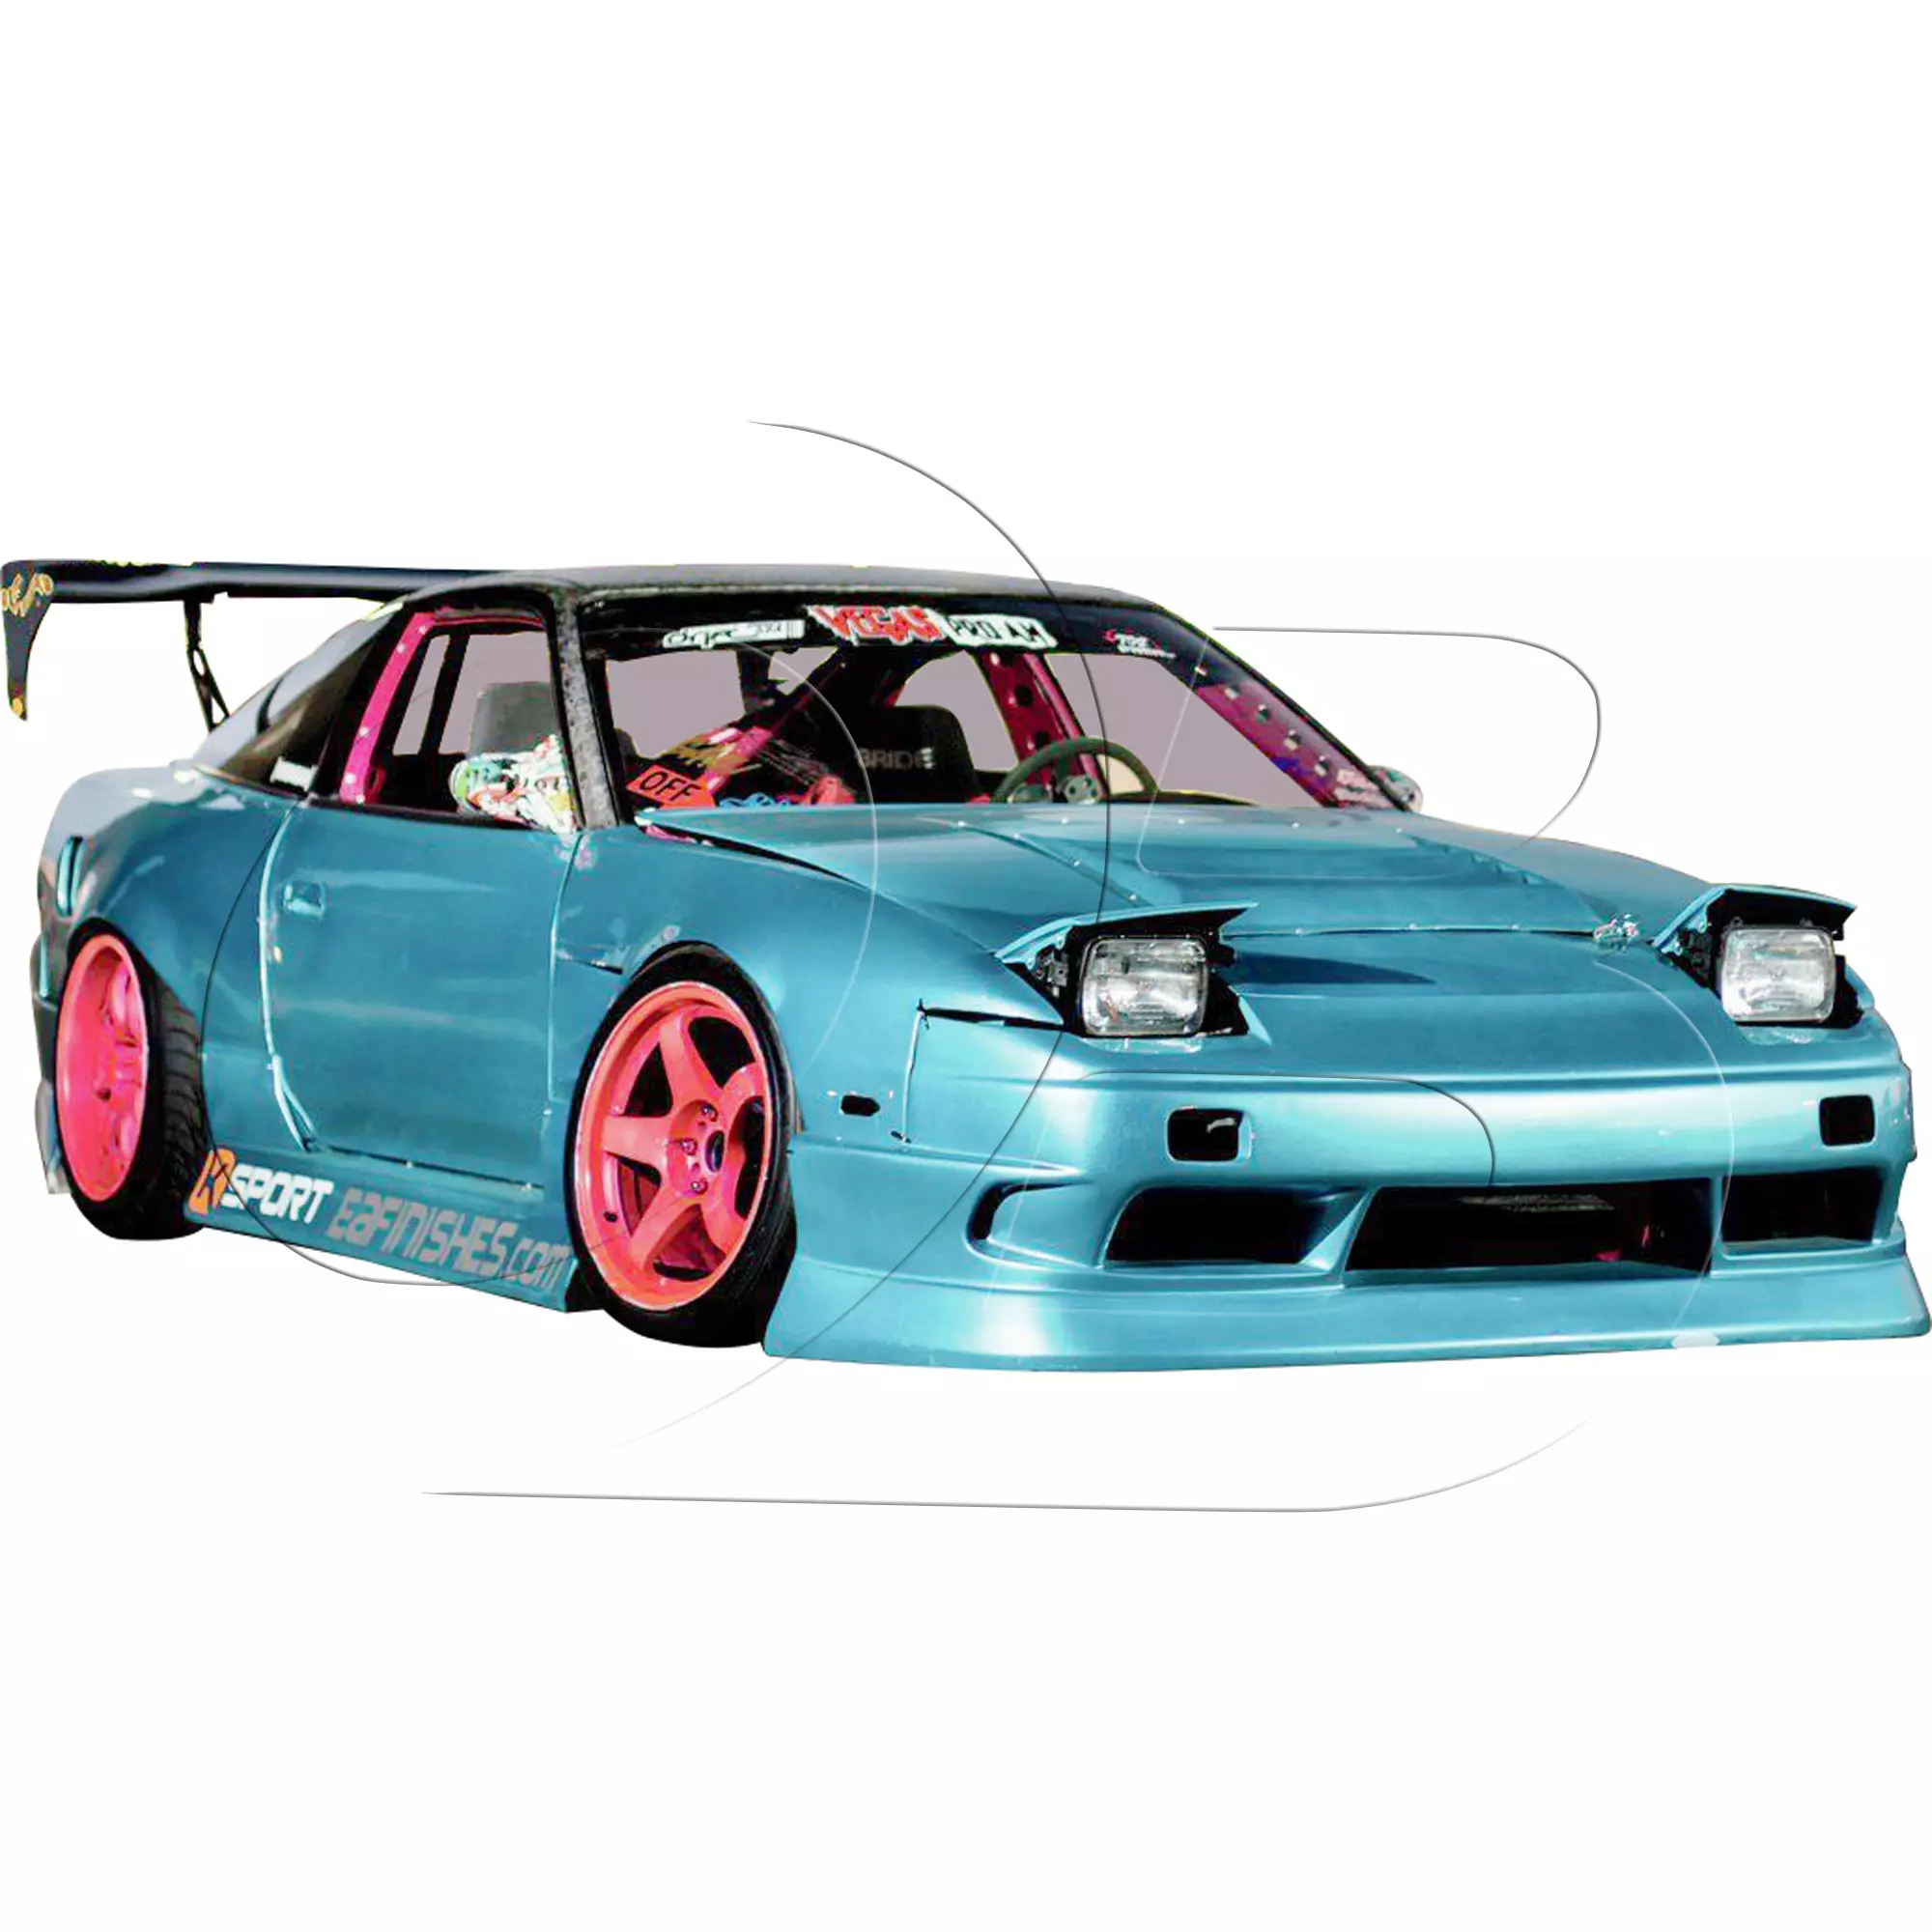 KBD Urethane Bsport2 Style 4pc Full Body Kit > Nissan 240SX 1989-1994 > 2dr Coupe - Image 57